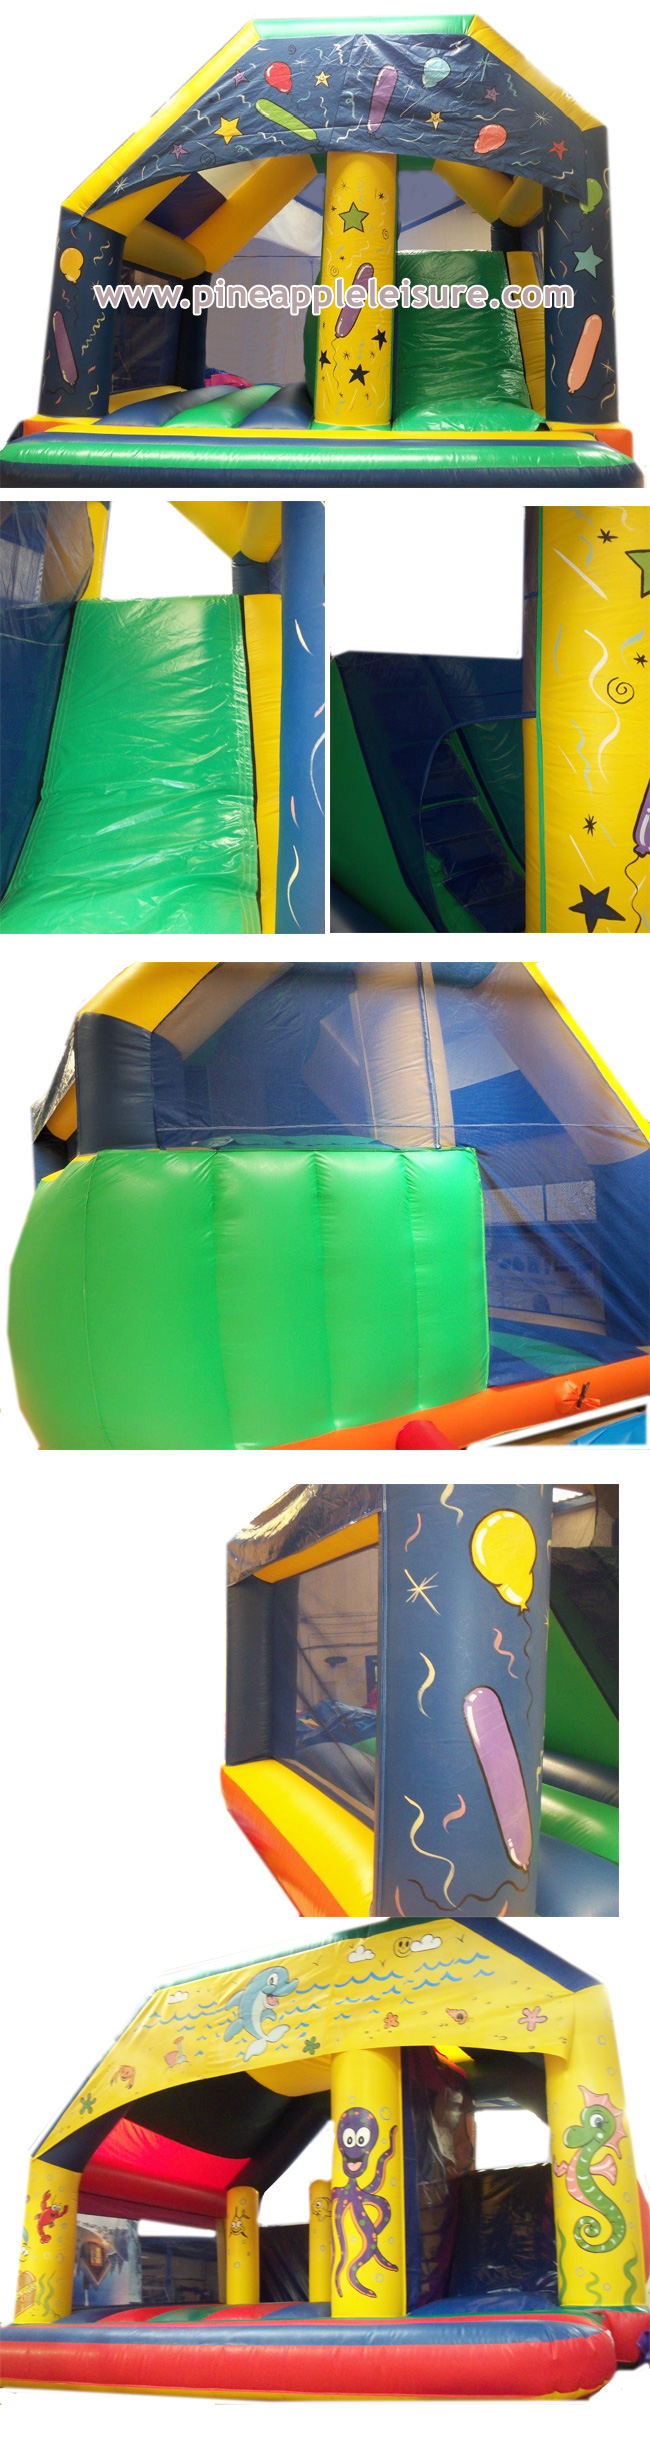 Bouncy Castle Sales - BC285 - Bouncy Inflatable for sale